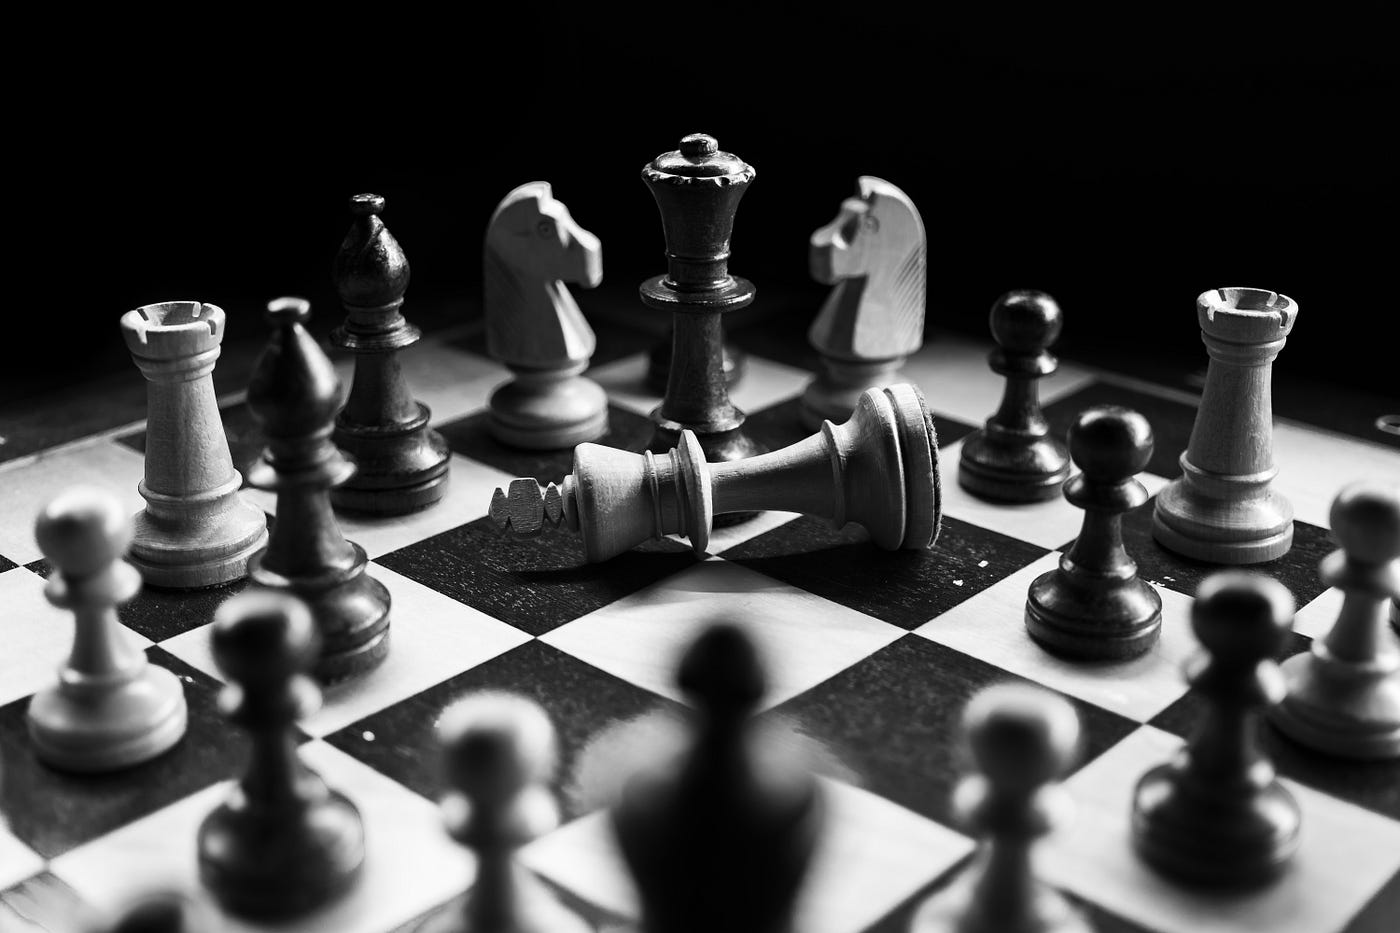 Elo Rating System – Definition And How It Works In Chess - Henry Chess Sets